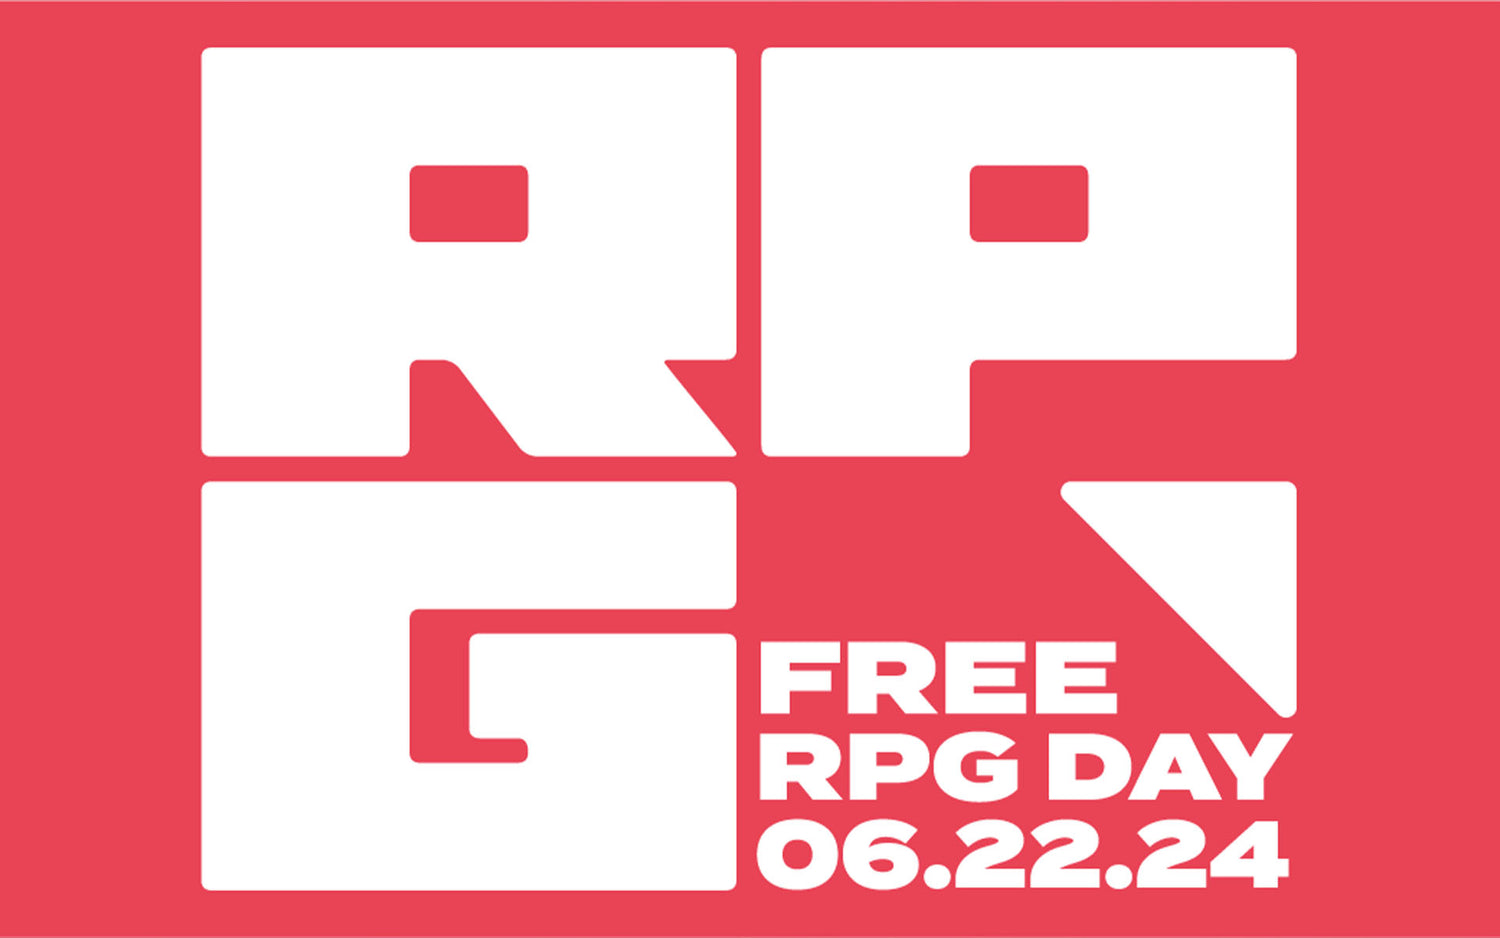 What is Free RPG Day?